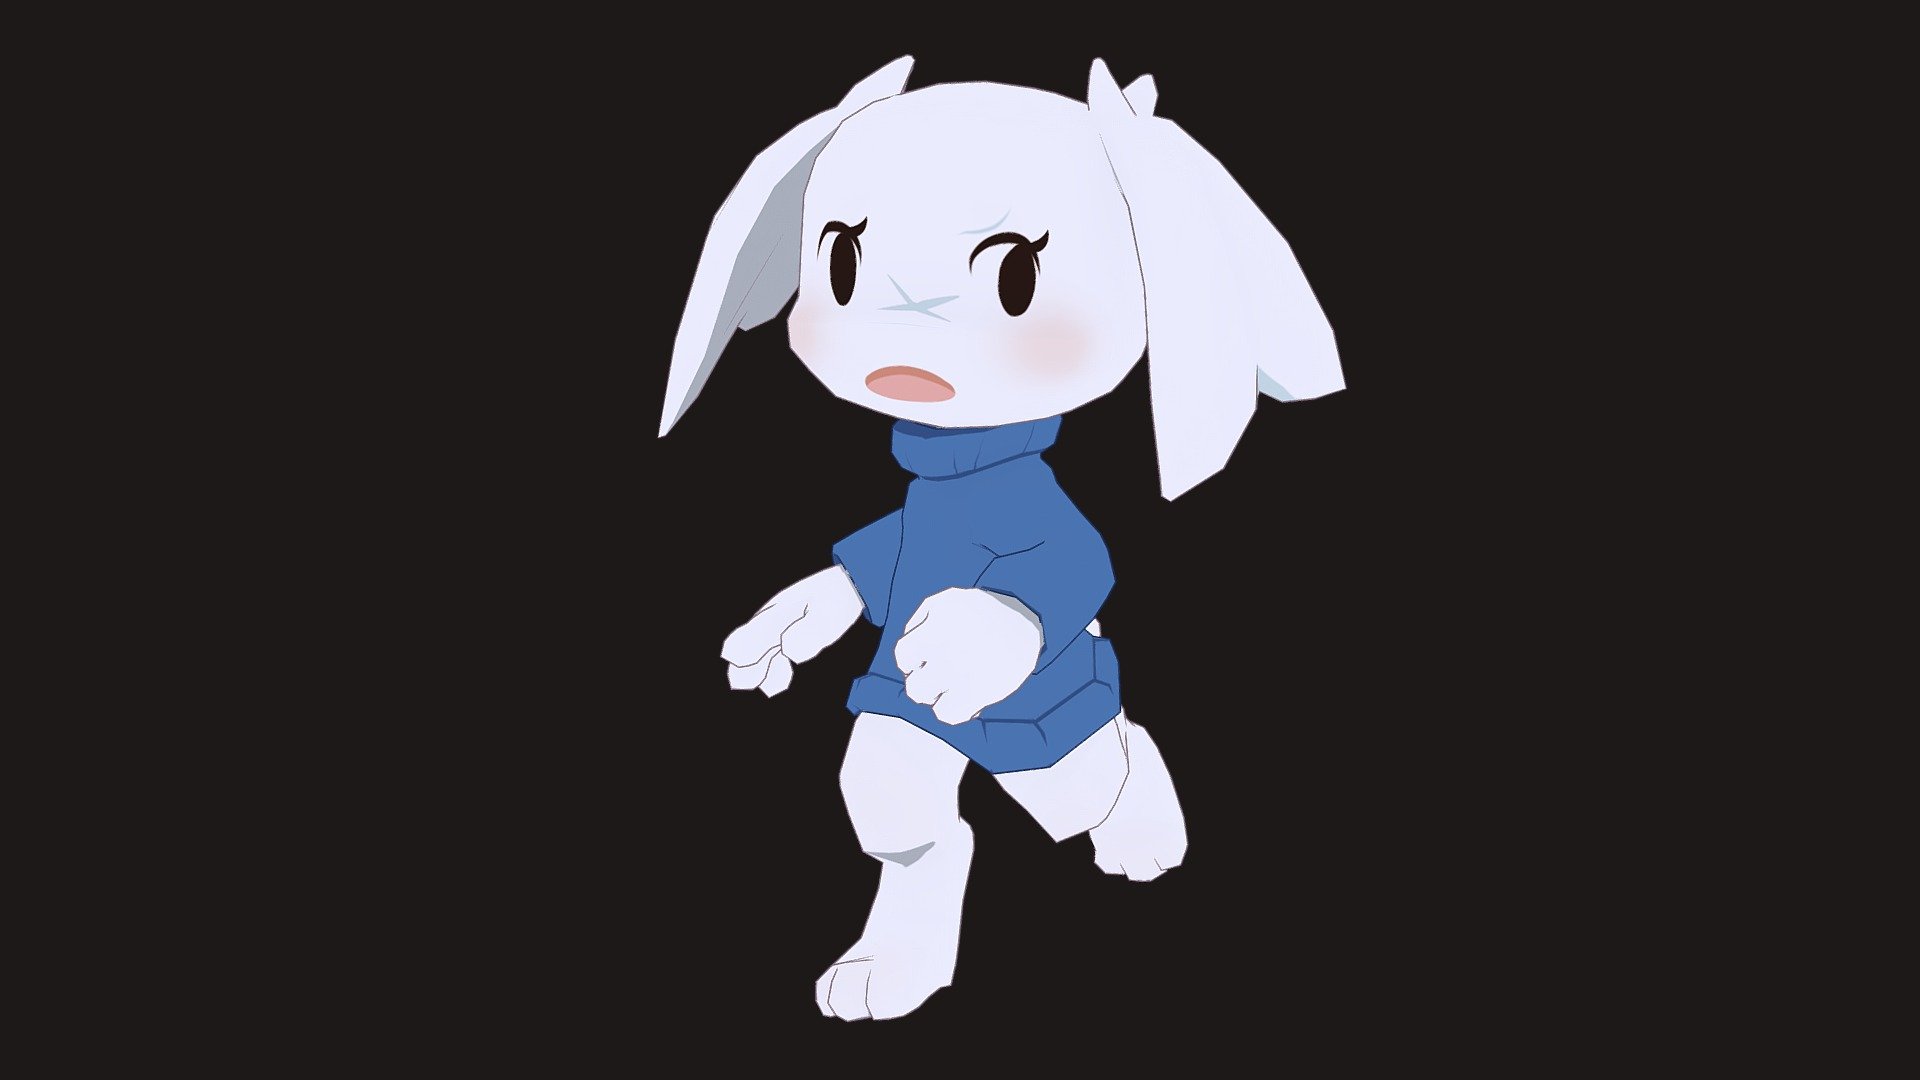 What could have been
, looking at you Nicalis.

original art: https://vignette.wikia.nocookie.net/c__/images/5/50/JAPSue.png/revision/latest?cb=20120925091548&amp;path-prefix=cavestory - Sue - 3D model by kekitopu 3d model